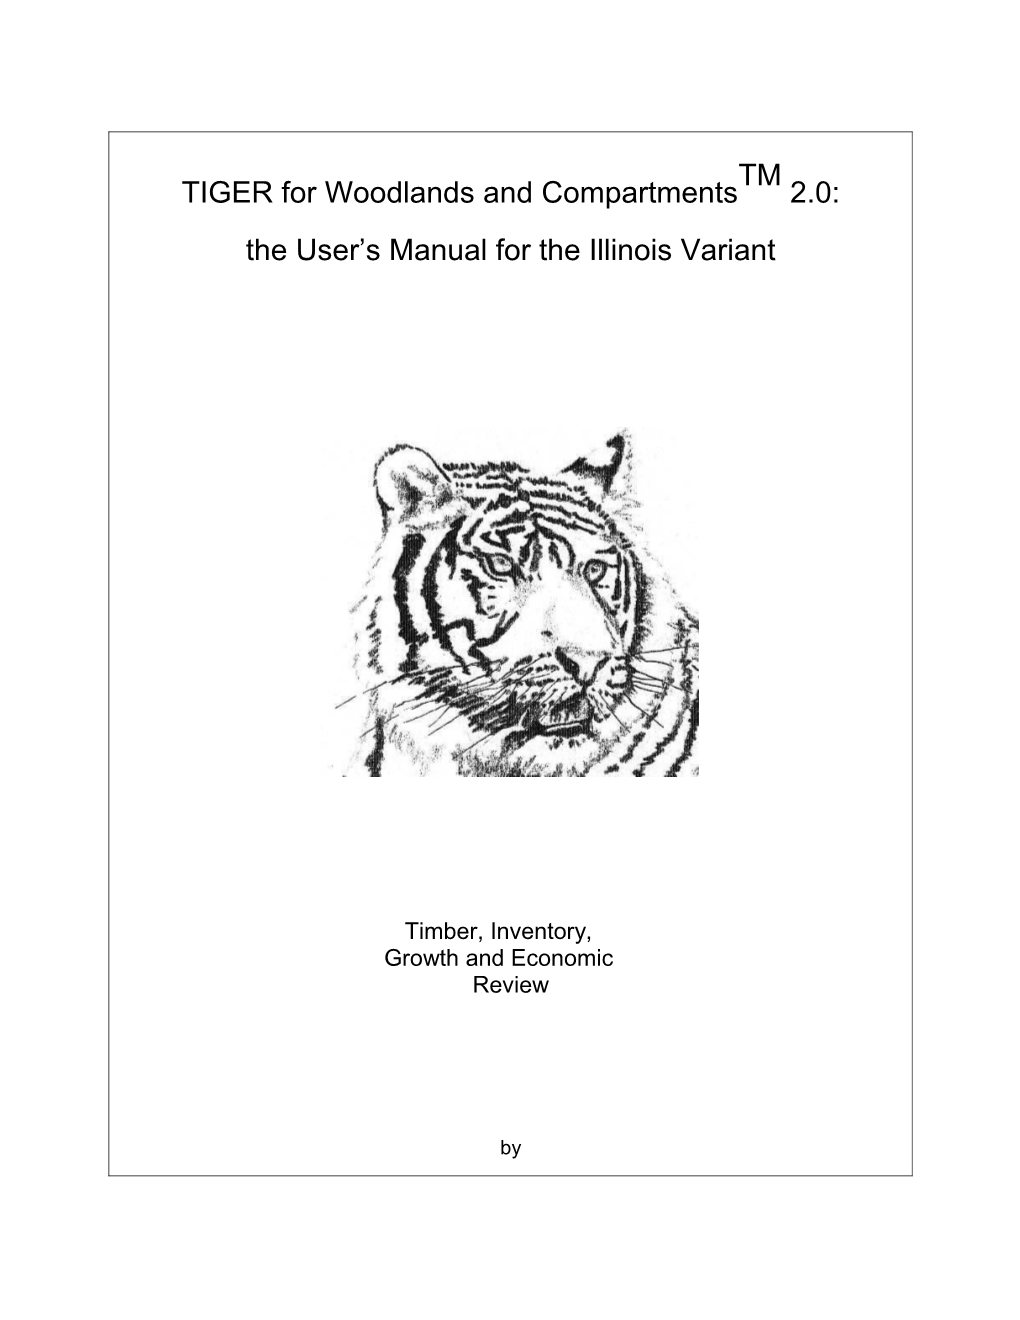 TIGER for Woodlands and Compartmentstm 2.0 s1